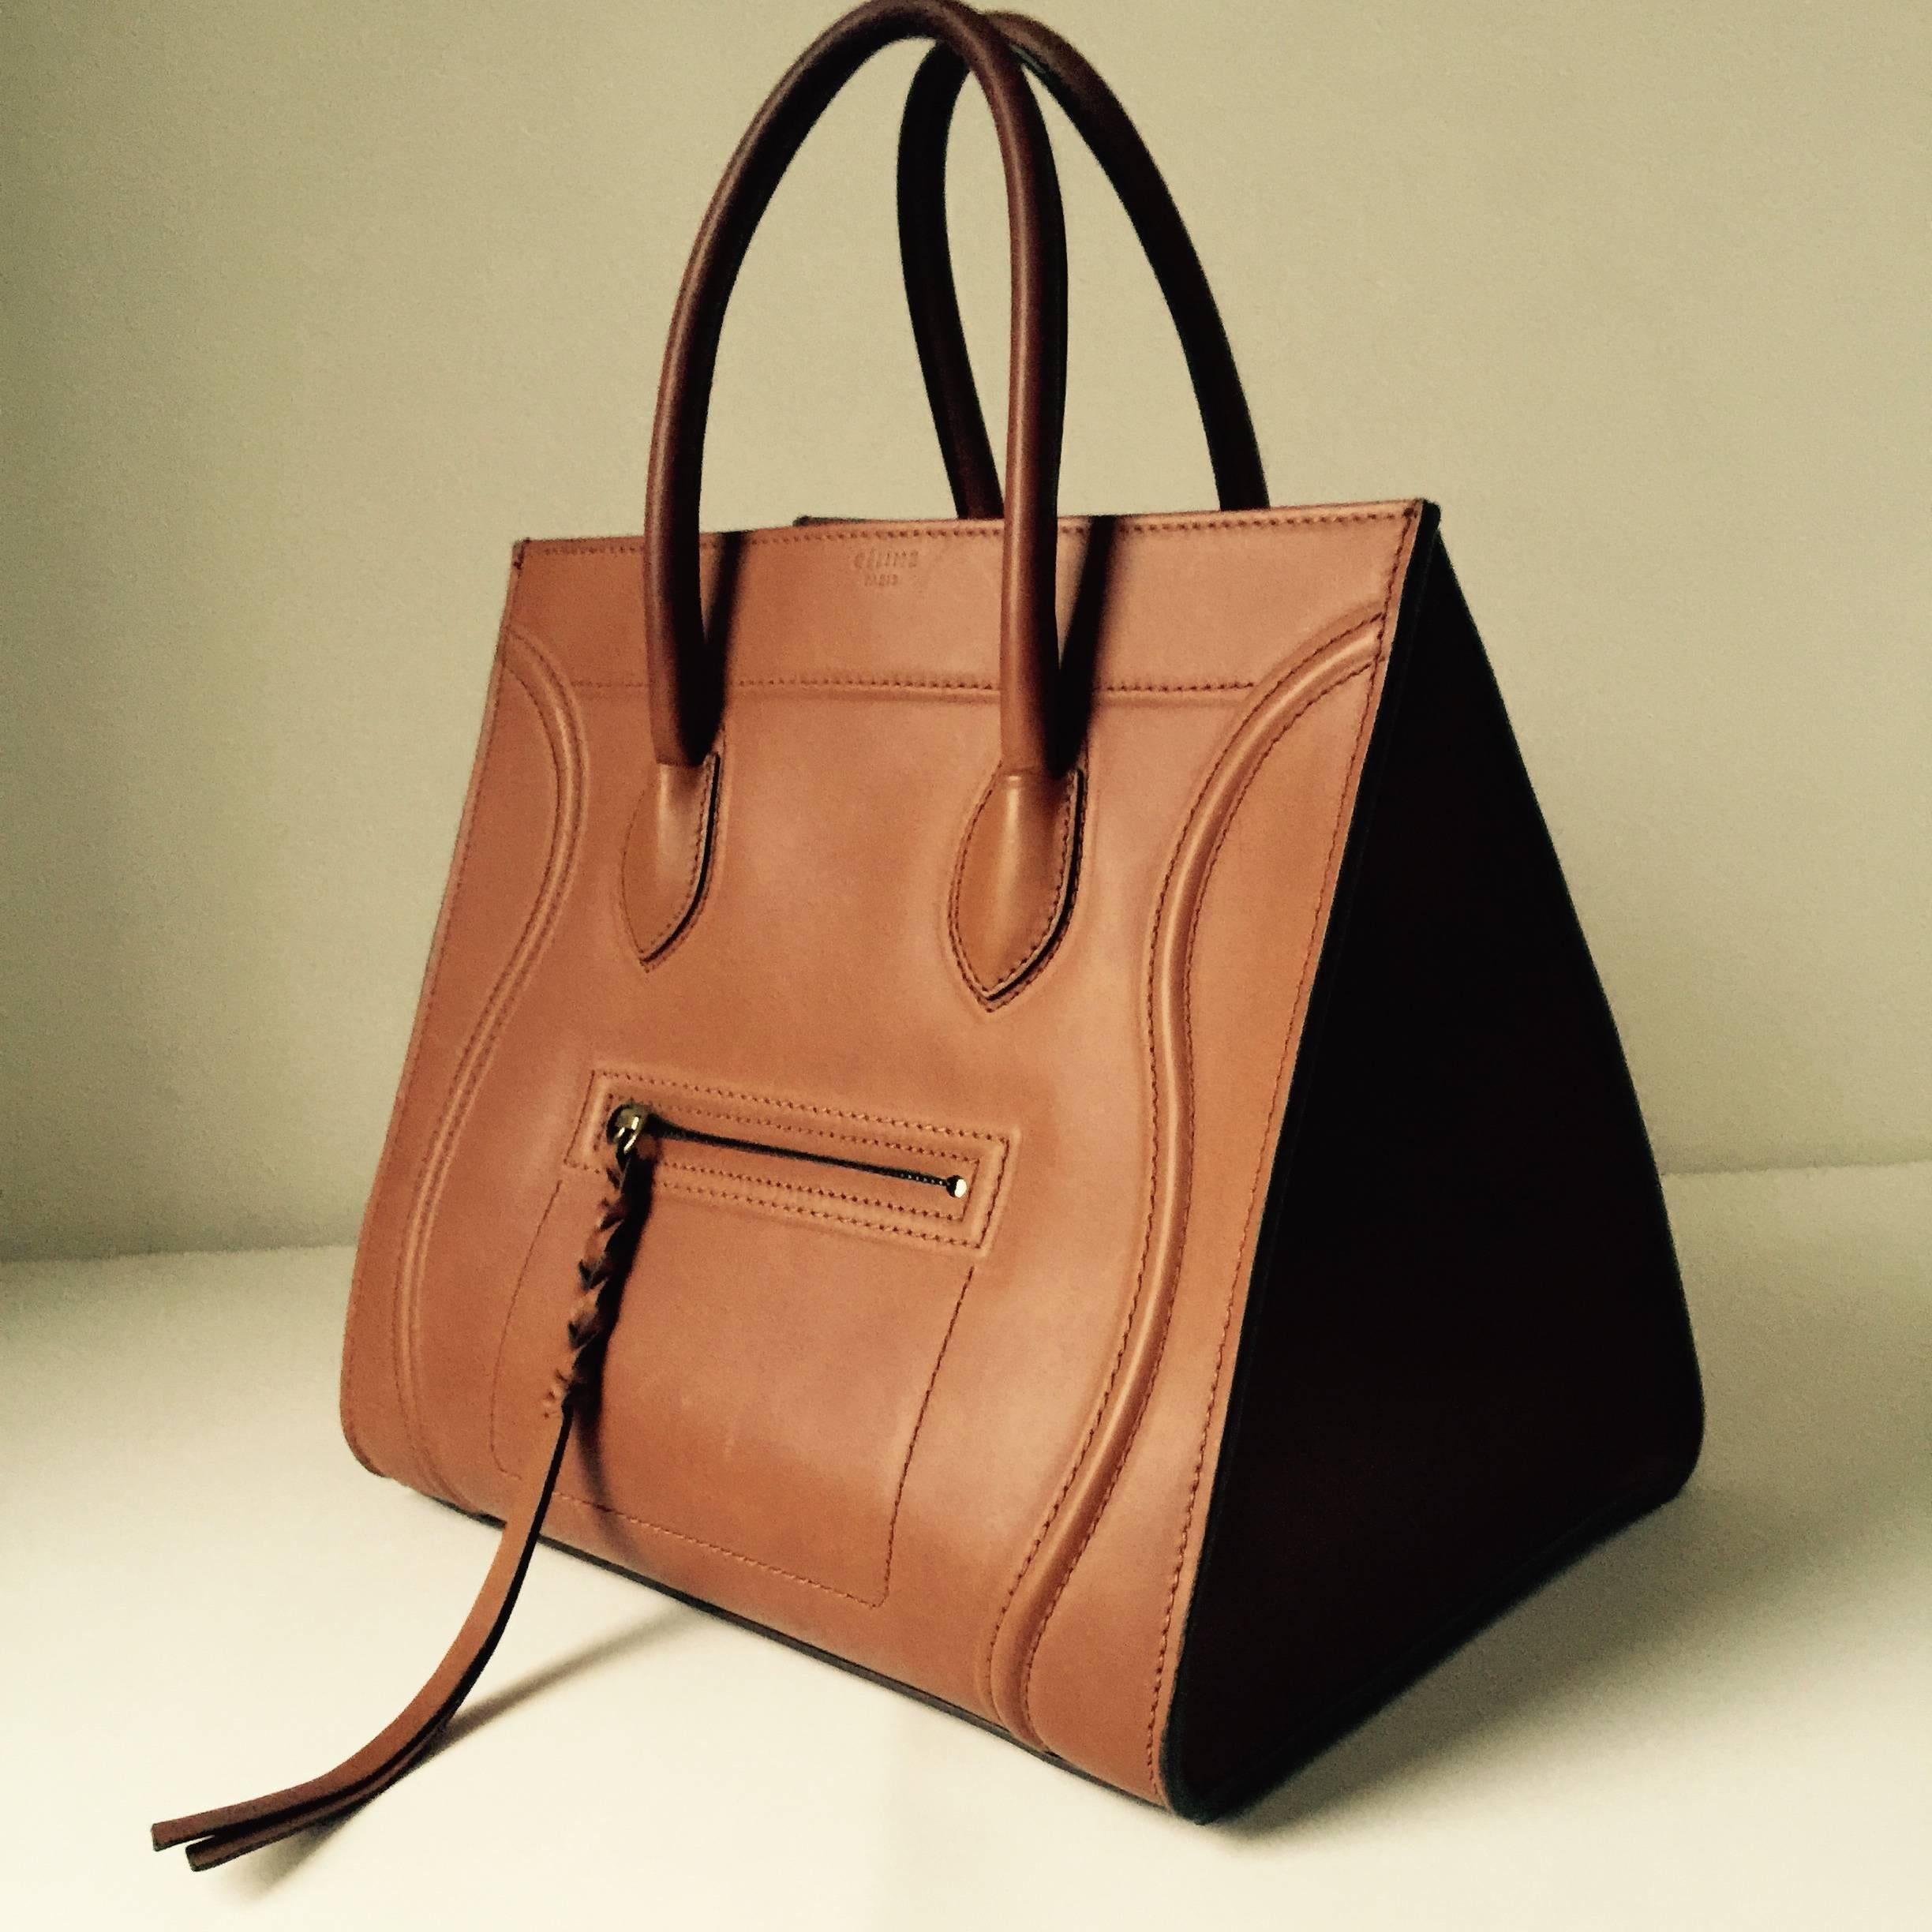 The Purse design by Phoebe Philo that brought Celine back on the fashion scene...
Classic construction that always looks sophisticated and chic...
featuring smooth calfskin leather... with rolled top handles.....suede lined interior...with open